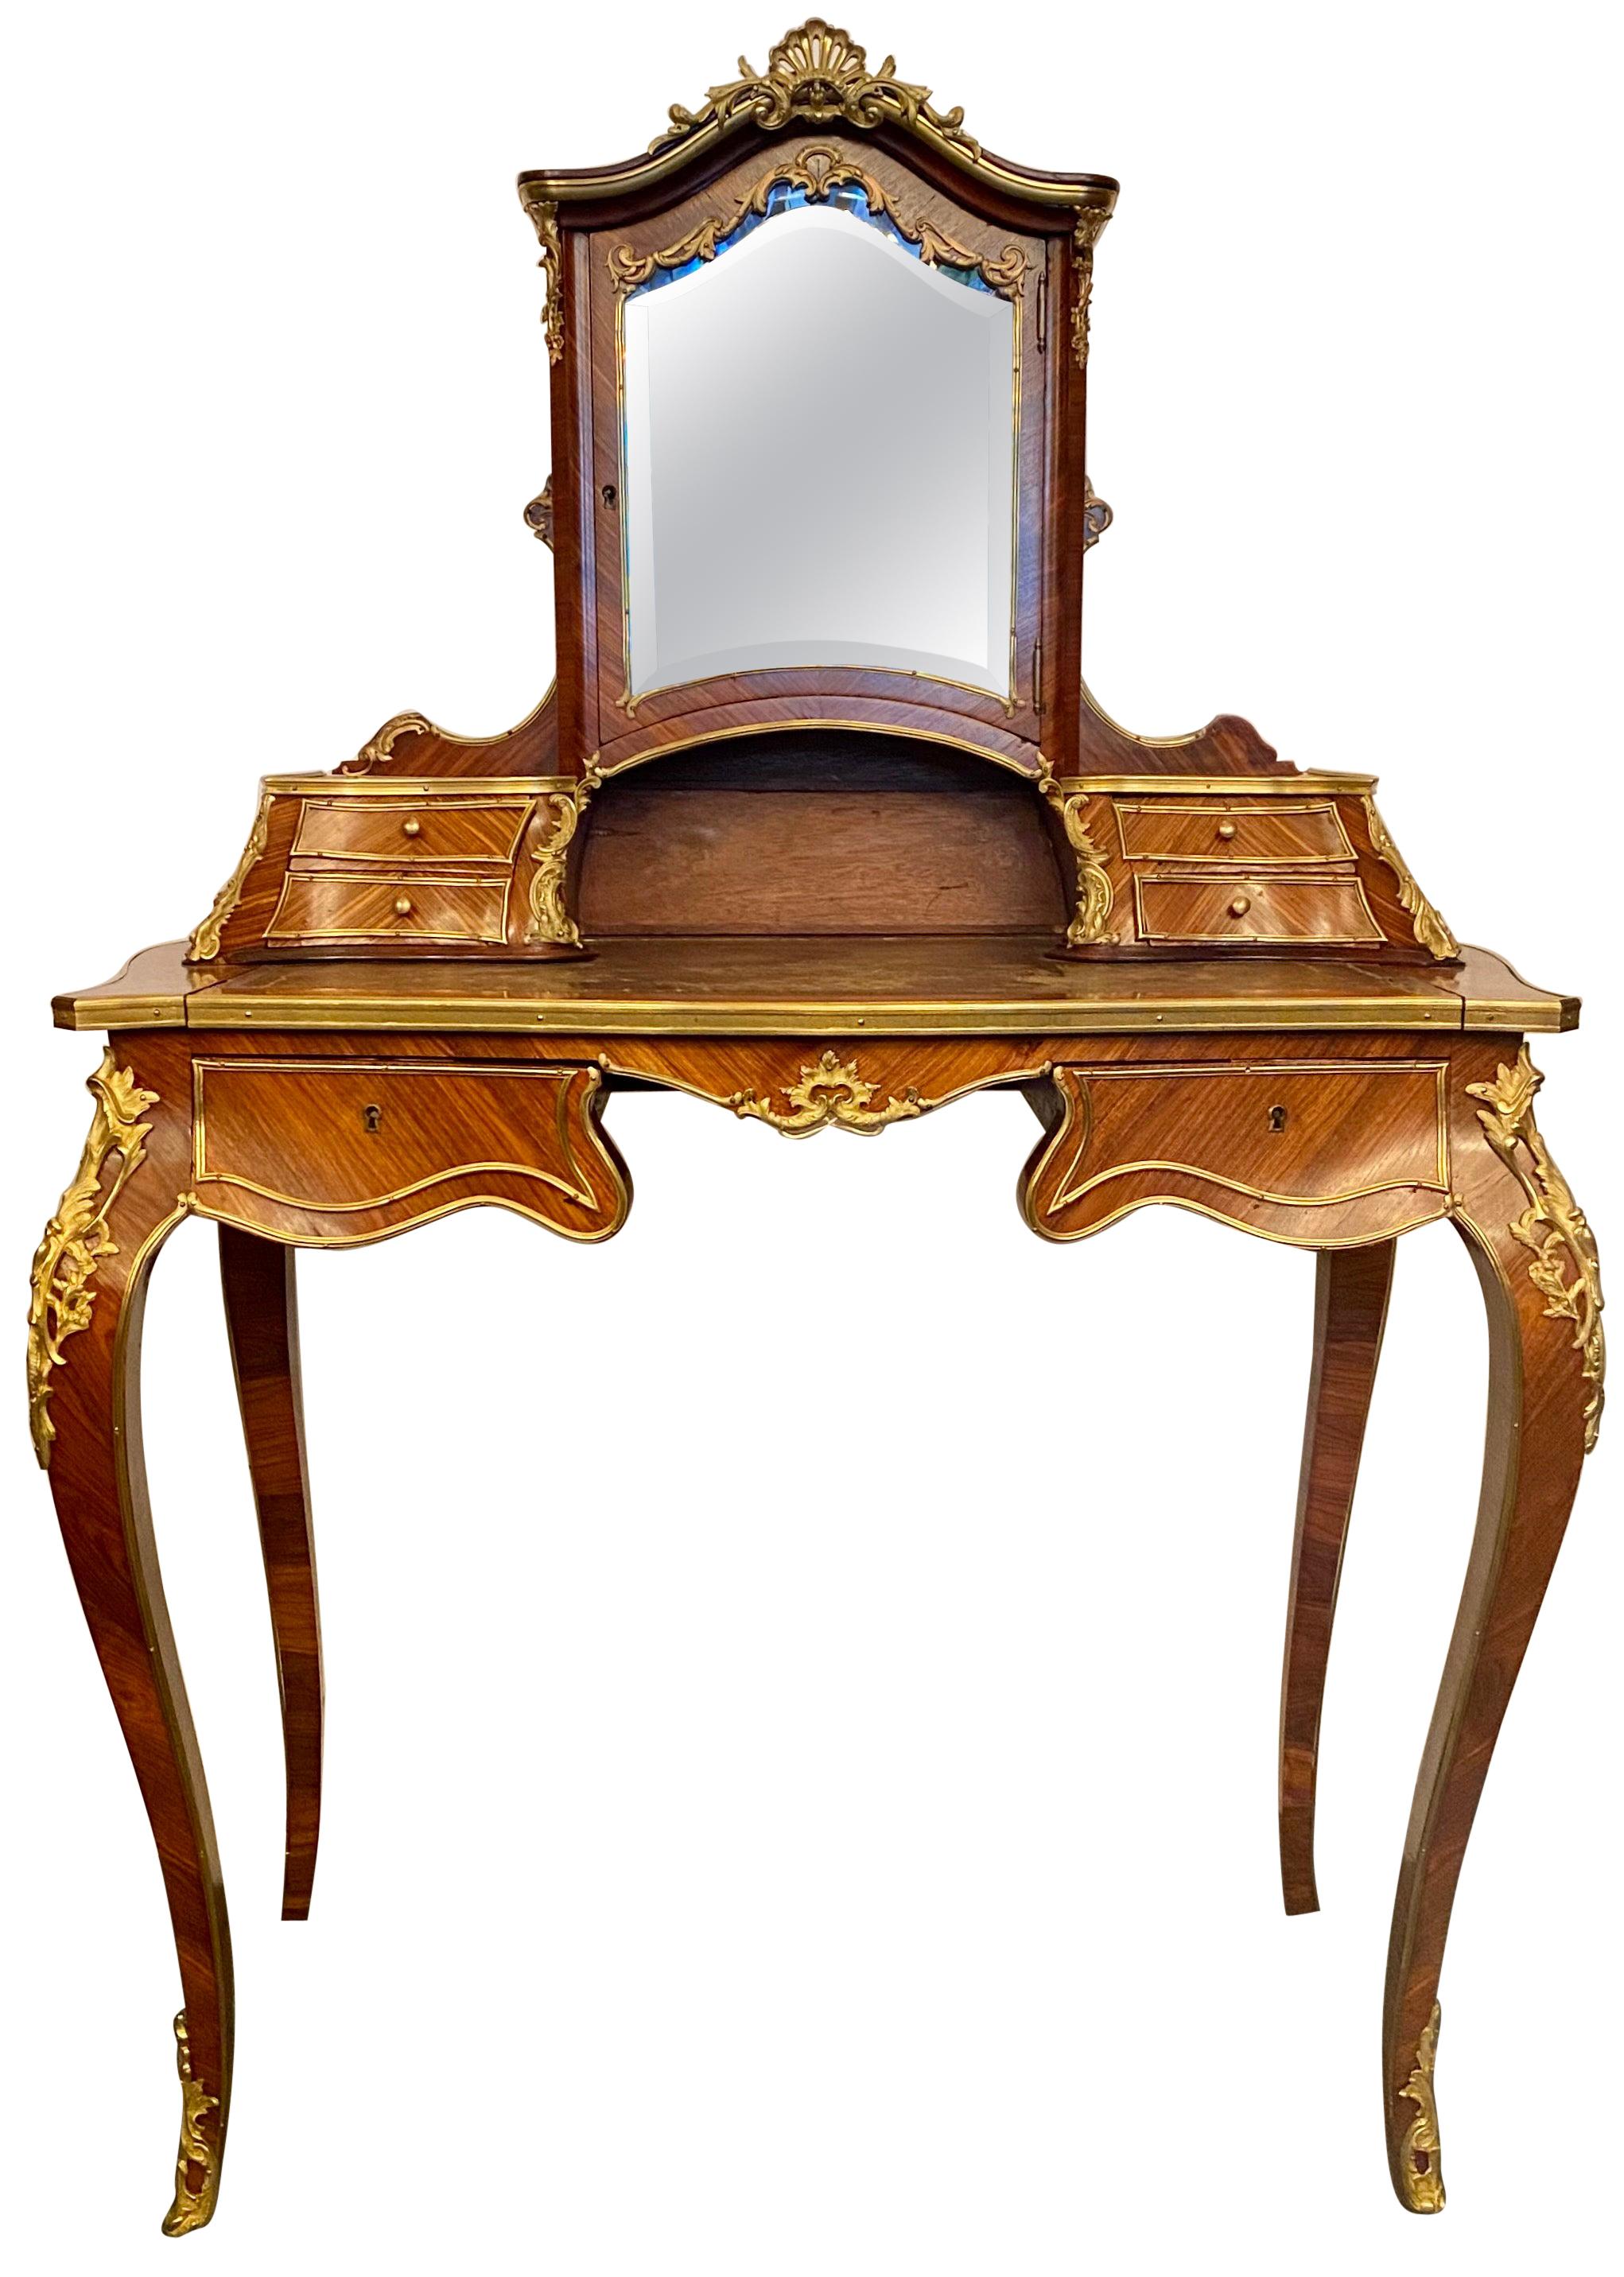 Antique French Rosewood and Gold Bronze Writing Desk or Vanity, circa 1880-1890